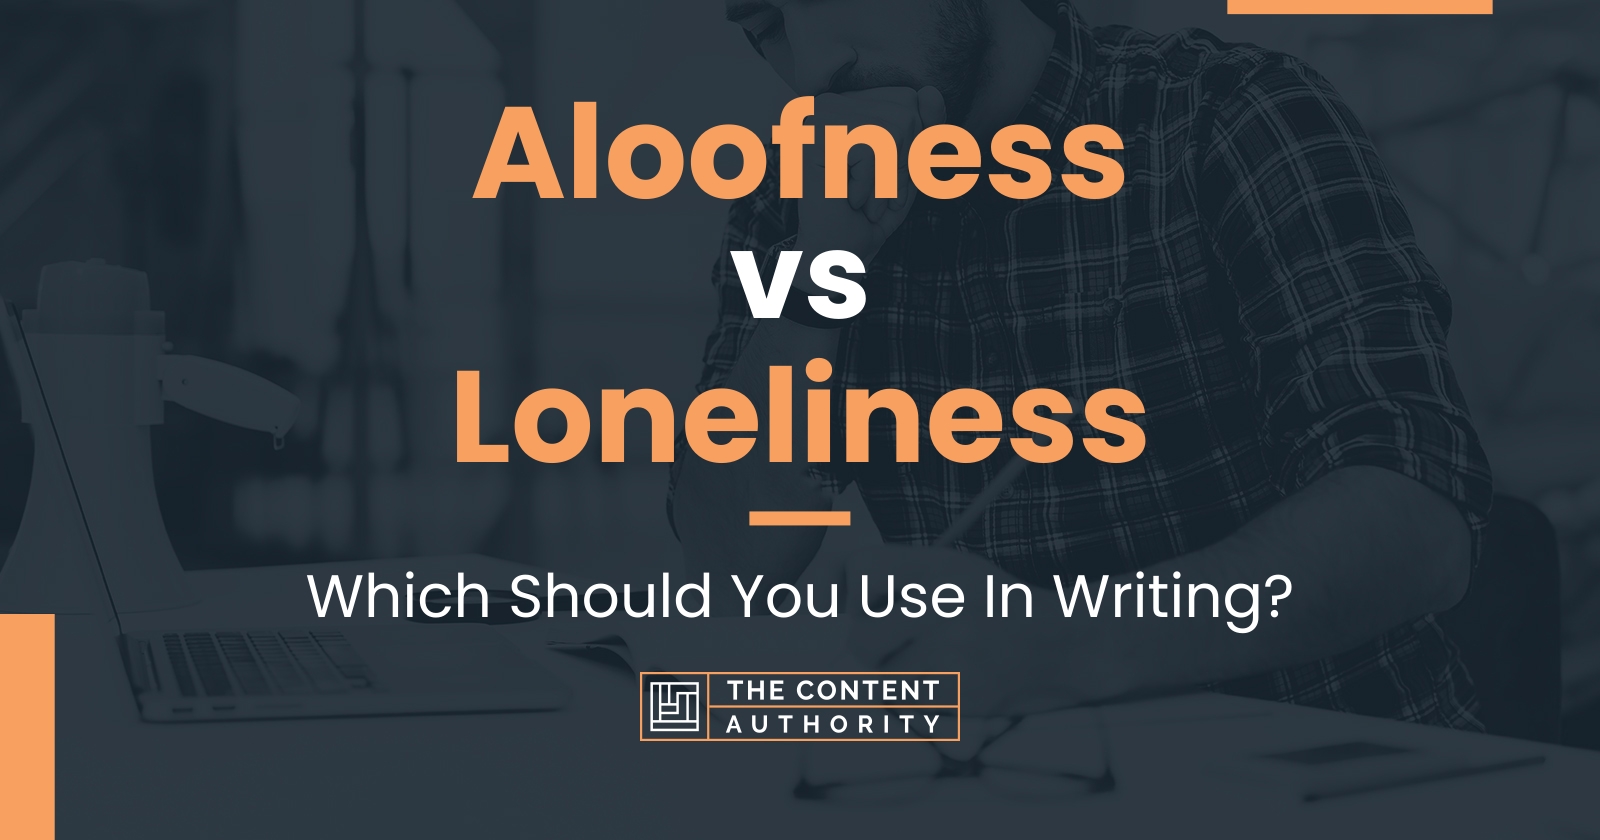 Aloofness vs Loneliness: Which Should You Use In Writing?